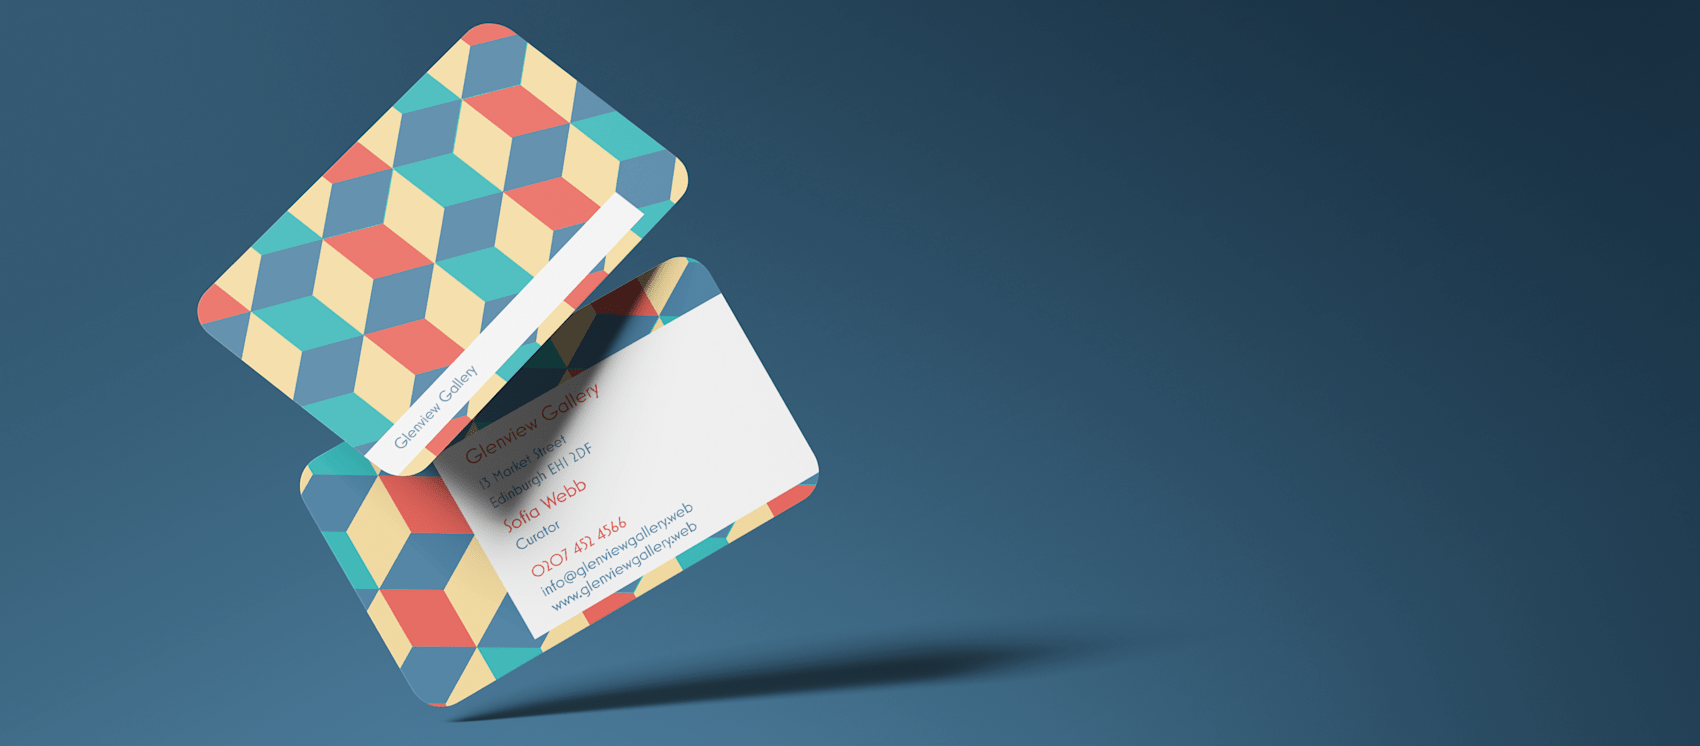 Rounded corner business cards